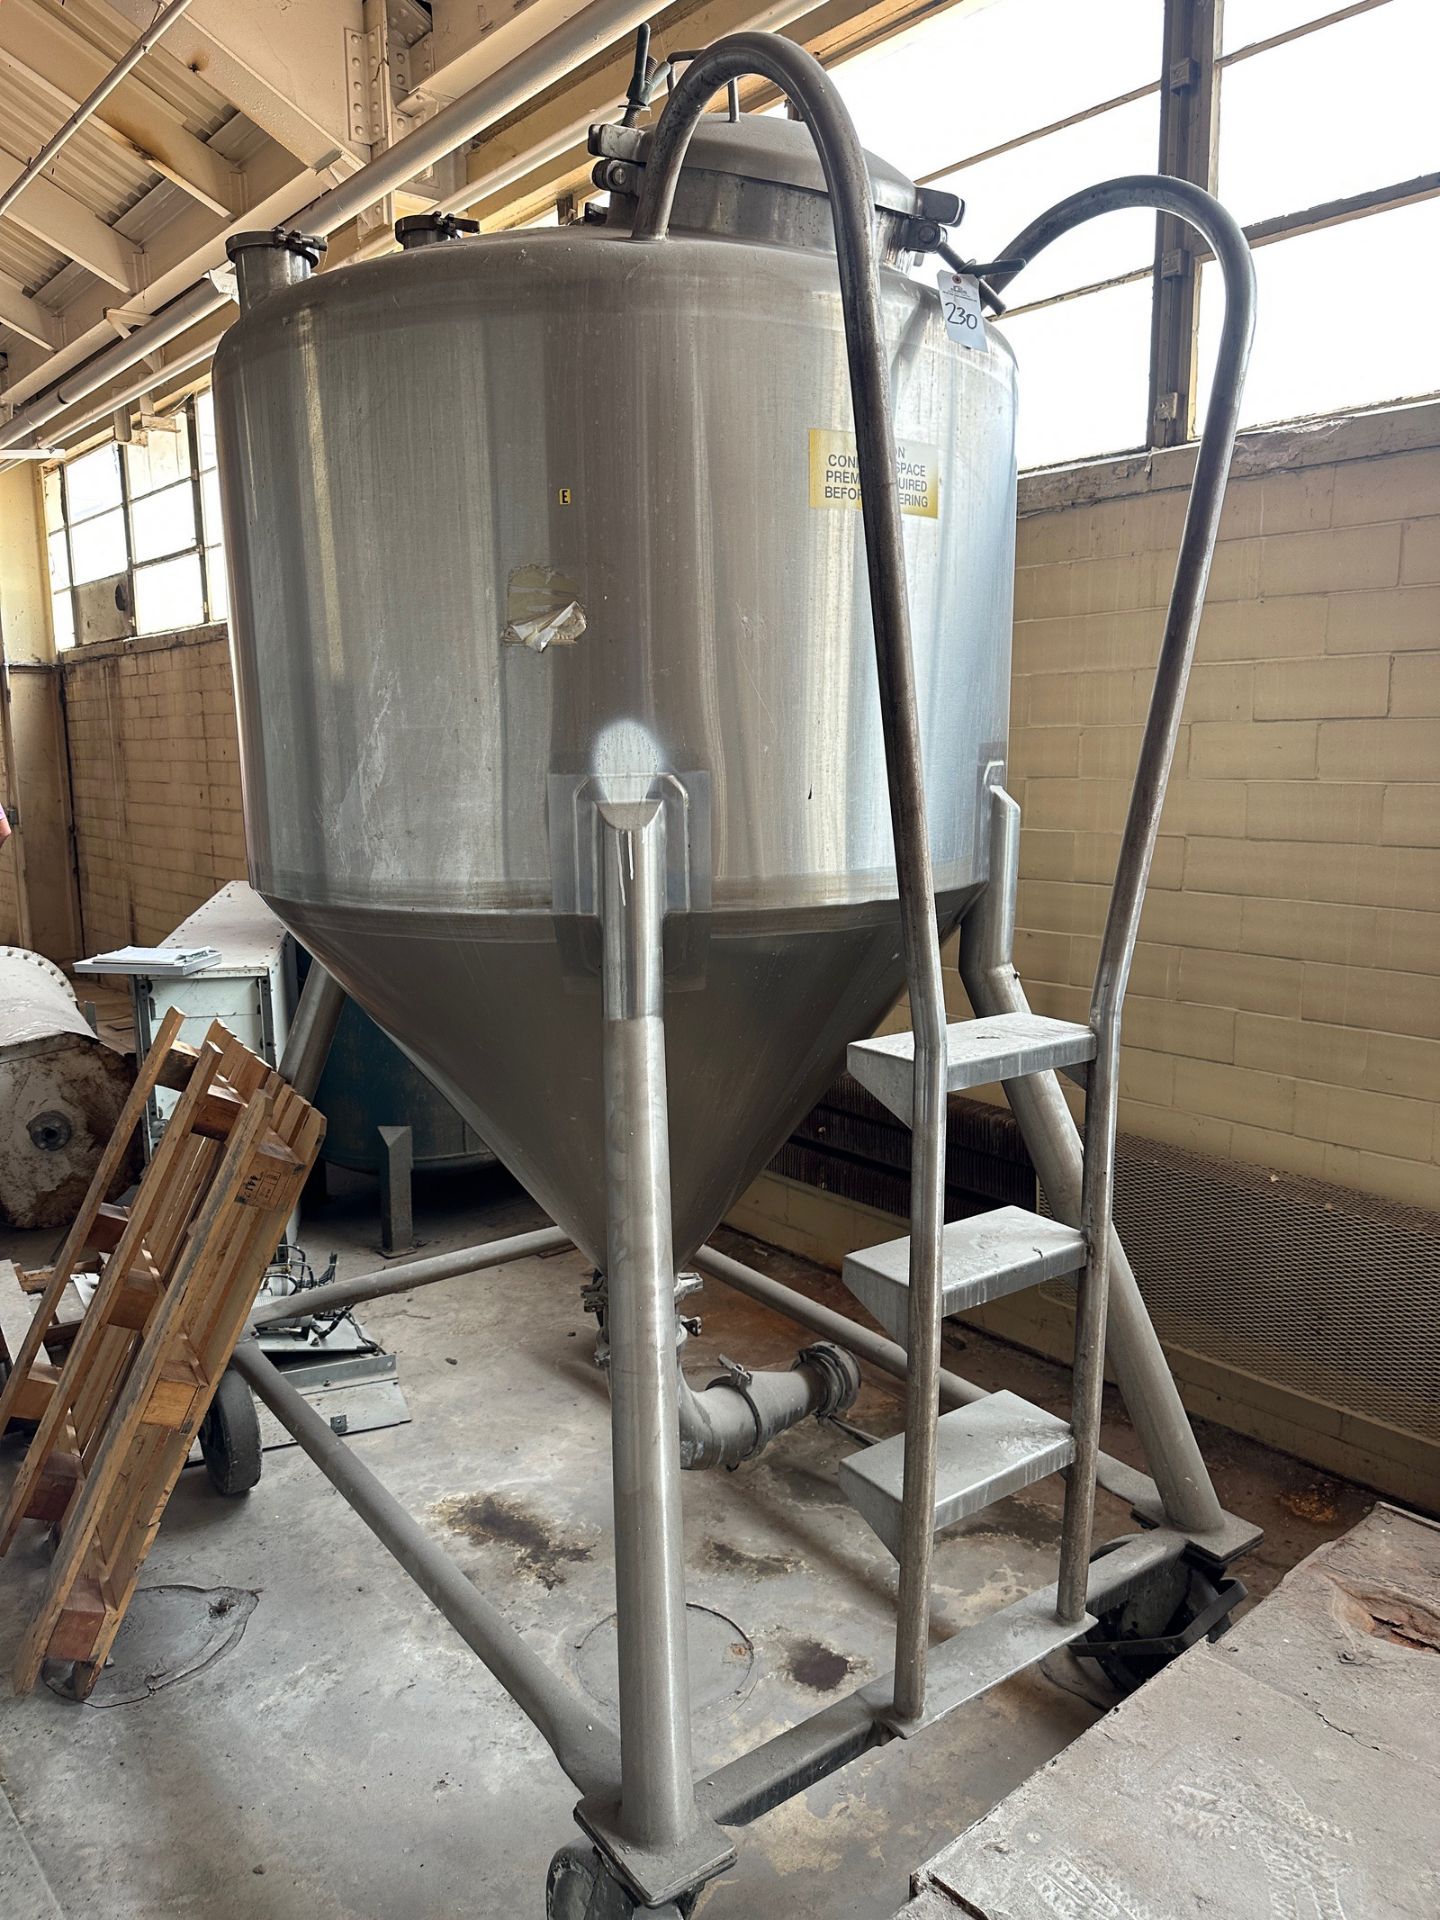 Stainless Steel Utility Tank on Casters (Approx. 5' Diameter and 9' O.H.) | Rig Fee $200